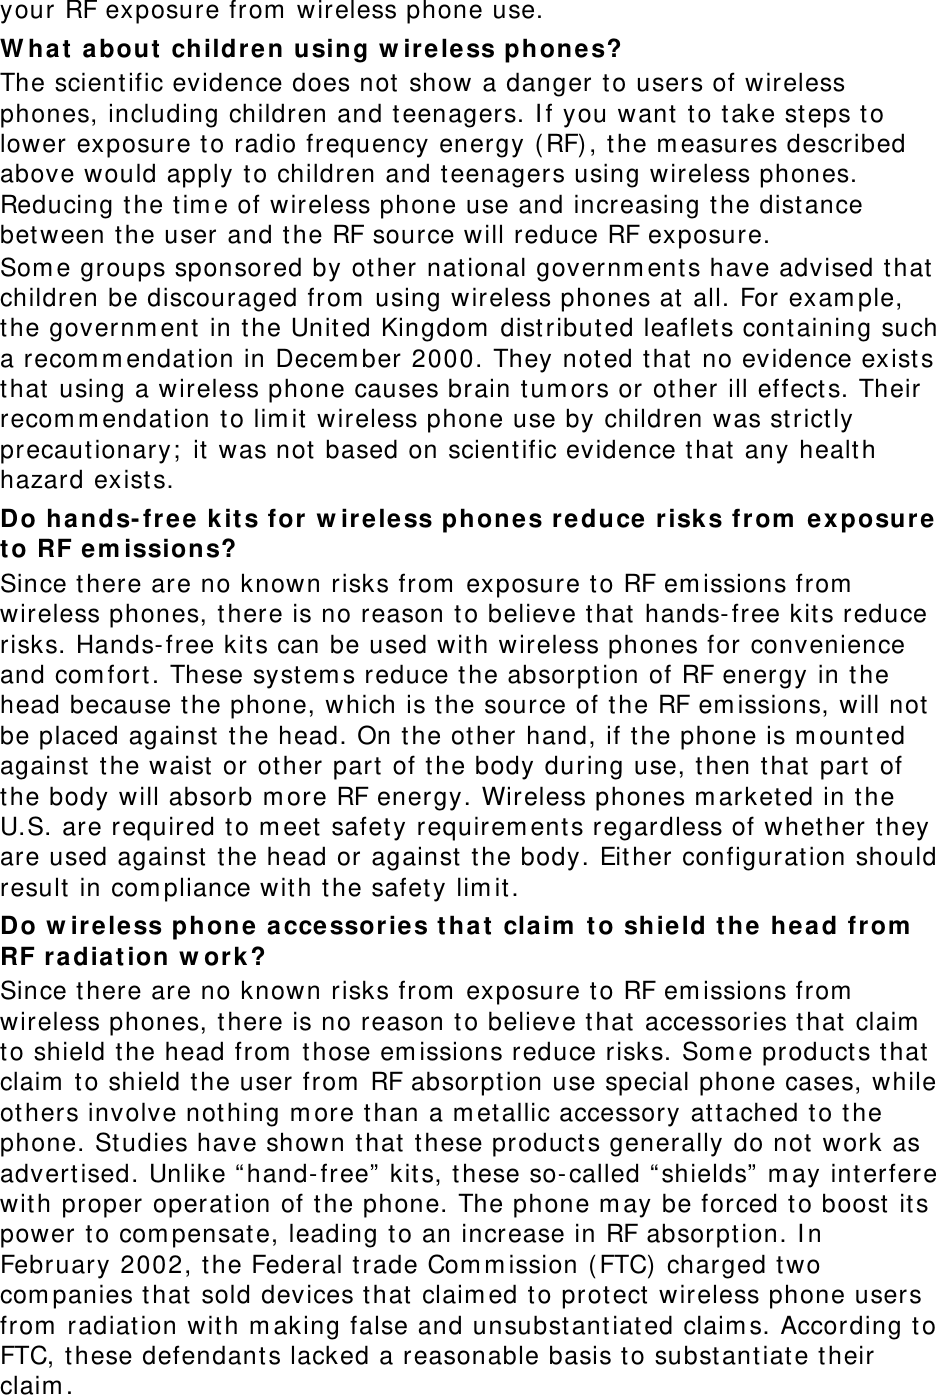 your RF exposure from  wireless phone use. W ha t  about  childre n using w ire less phone s? The scient ific evidence does not  show a danger to users of wireless phones, including children and teenagers. I f you want  t o t ake st eps to lower exposure t o radio frequency energy ( RF) , the m easures described above would apply t o children and t eenagers using wireless phones. Reducing t he tim e of wireless phone use and increasing the dist ance between the user and t he RF source will reduce RF exposure. Som e groups sponsored by ot her national governm ent s have advised that children be discouraged from  using wireless phones at  all. For exam ple, the governm ent  in t he Unit ed Kingdom  dist ributed leaflets containing such a recom m endat ion in Decem ber 2000. They not ed t hat  no evidence exists that using a wireless phone causes brain t um ors or other ill effect s. Their recom m endat ion to lim it wireless phone use by children was st rict ly precautionary;  it was not  based on scient ific evidence t hat  any health hazard exist s.   Do hands- fr ee  kit s for w ire less phone s r educe risks fr om  exposure t o RF e m issions? Since there are no known risks from  exposure t o RF em issions from  wireless phones, t here is no reason t o believe t hat  hands- free kit s reduce risks. Hands- free kit s can be used with wireless phones for convenience and com fort . These system s reduce t he absorption of RF energy in t he head because t he phone, which is the source of t he RF em issions, will not be placed against  t he head. On the other hand, if t he phone is m ount ed against the waist  or other part of t he body during use, t hen t hat part  of the body will absorb m ore RF energy. Wireless phones m arketed in the U.S. are required t o m eet safet y requirem ent s regardless of whether t hey are used against  t he head or against  t he body. Eit her configuration should result in com pliance wit h the safety lim it . Do w ireless phone a ccessor ies t ha t  cla im  t o shie ld t he  he ad from  RF ra diation w ork? Since there are no known risks from  exposure t o RF em issions from  wireless phones, t here is no reason t o believe t hat  accessories that  claim  to shield t he head from  those em issions reduce risks. Som e product s t hat  claim  to shield the user from  RF absorpt ion use special phone cases, while others involve not hing m ore t han a m et allic accessory at tached to the phone. Studies have shown t hat  t hese products generally do not  work as advert ised. Unlike “ hand- free”  kit s, these so- called “ shields”  m ay interfere with proper operat ion of t he phone. The phone m ay be forced t o boost  it s power to com pensate, leading to an increase in RF absorpt ion. I n February 2002, t he Federal trade Com m ission (FTC) charged two com panies t hat  sold devices t hat  claim ed t o protect  wireless phone users from  radiation wit h m aking false and unsubst ant iat ed claim s. According t o FTC, t hese defendants lacked a reasonable basis t o subst antiate t heir claim . 